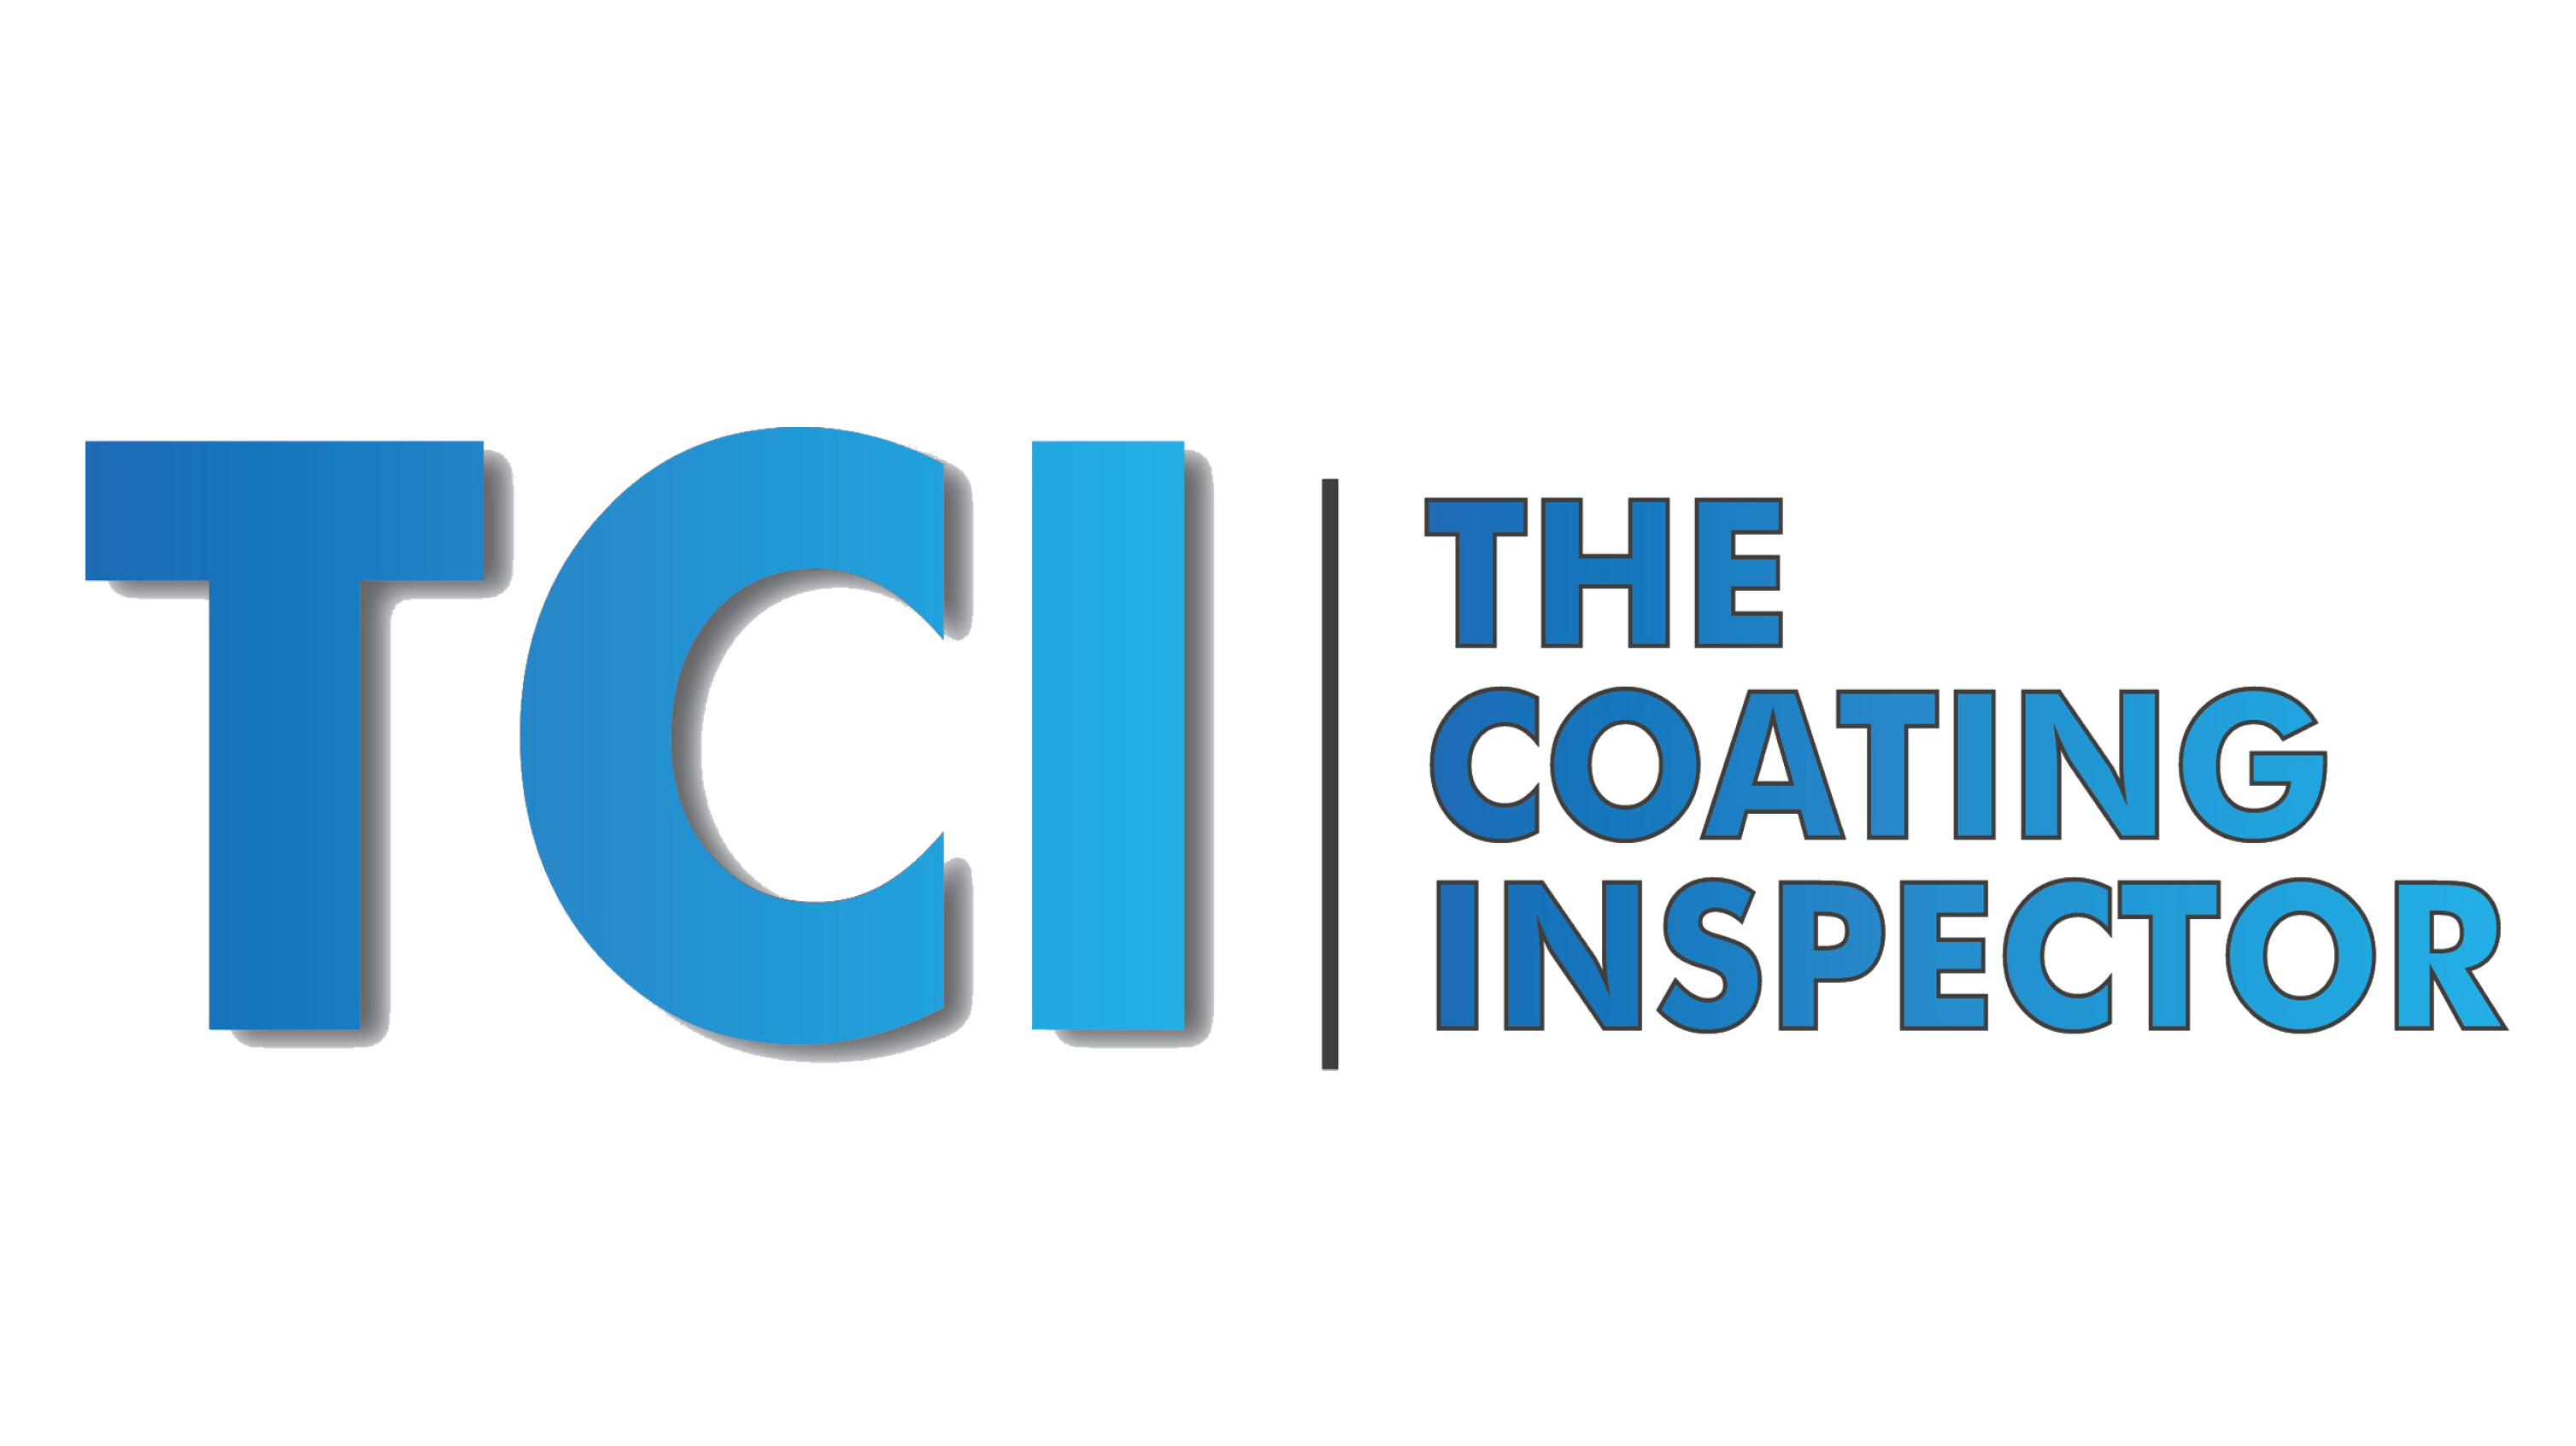 The Coating Inspector